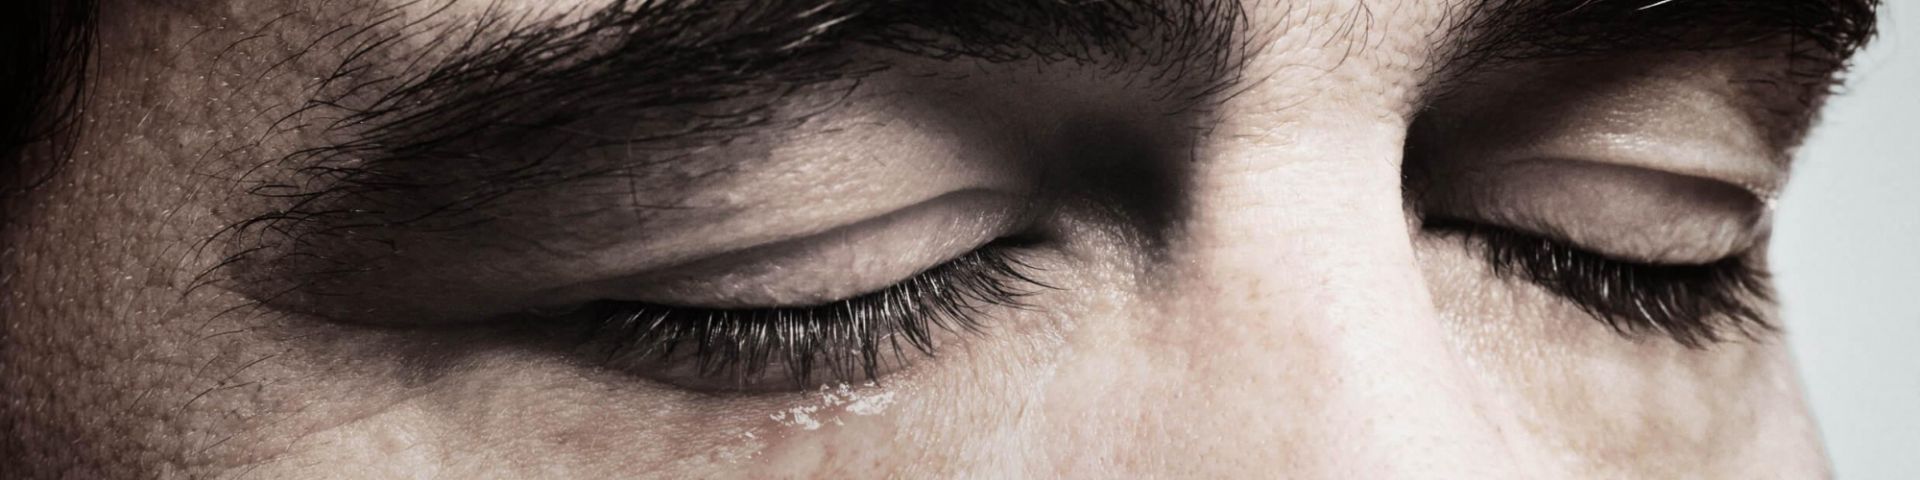 Meaningful Reflections: Tears